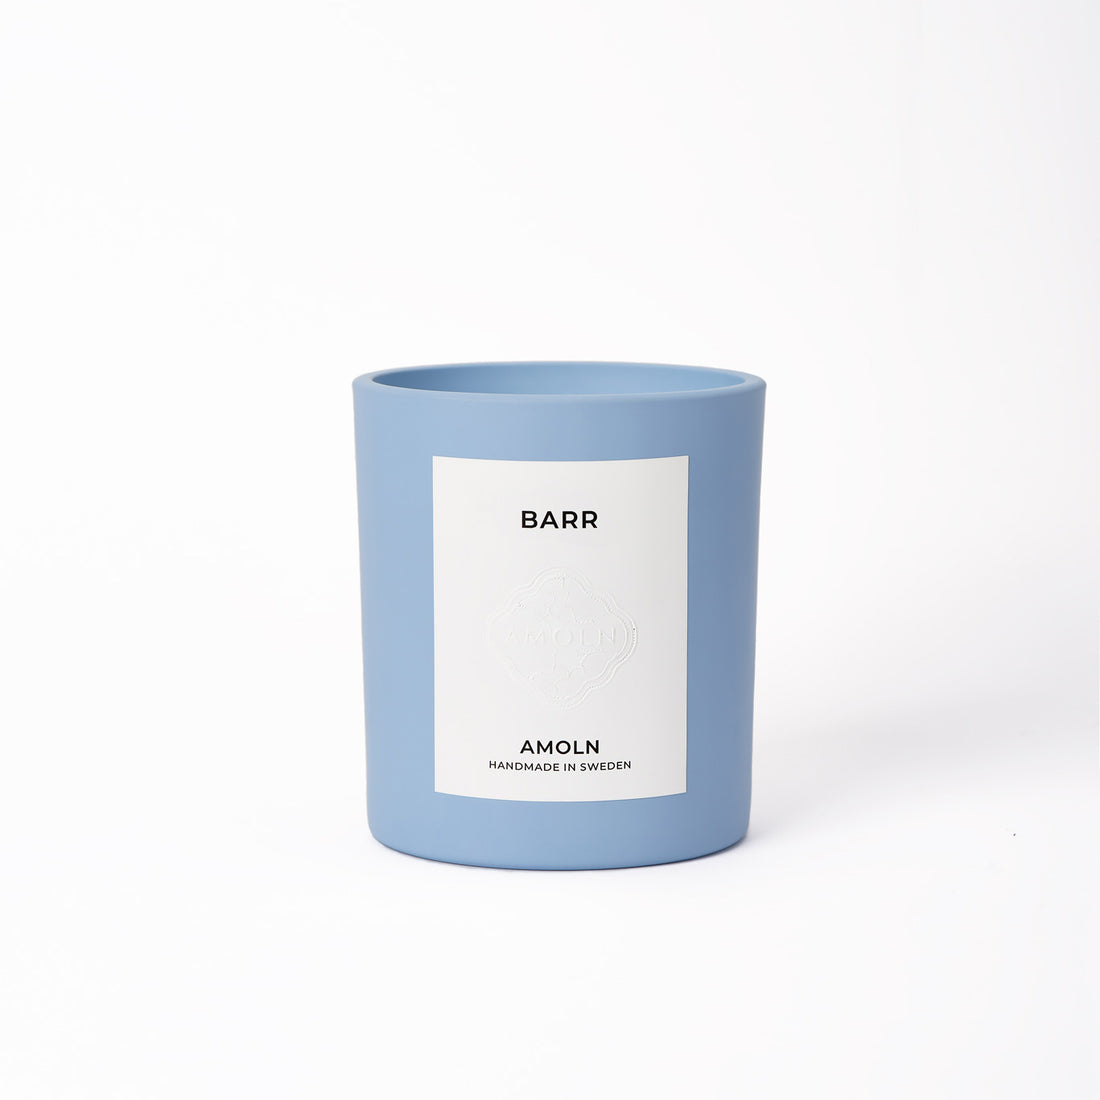 Amoln Barr Candle